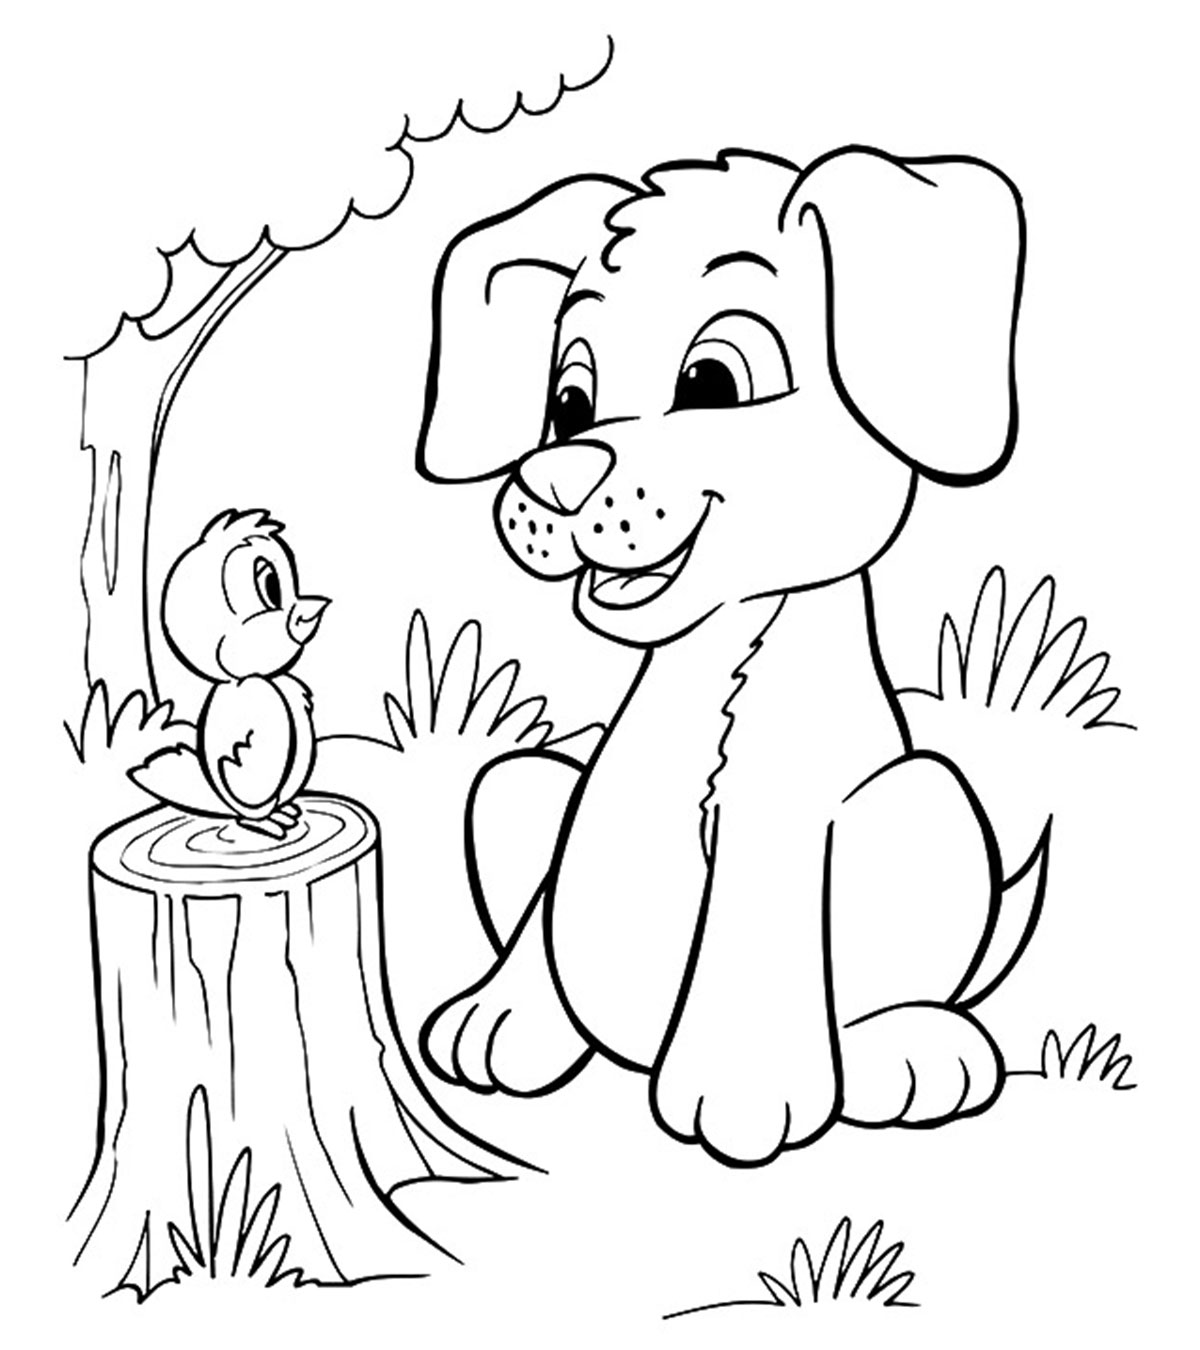 coloring pages : Cute Puppy Coloring Pages For Your Little Ones_1 Freecture  Kids German Shepherd Akita Dachshund Puppy Coloring Picture ~  mommaonamissioninc